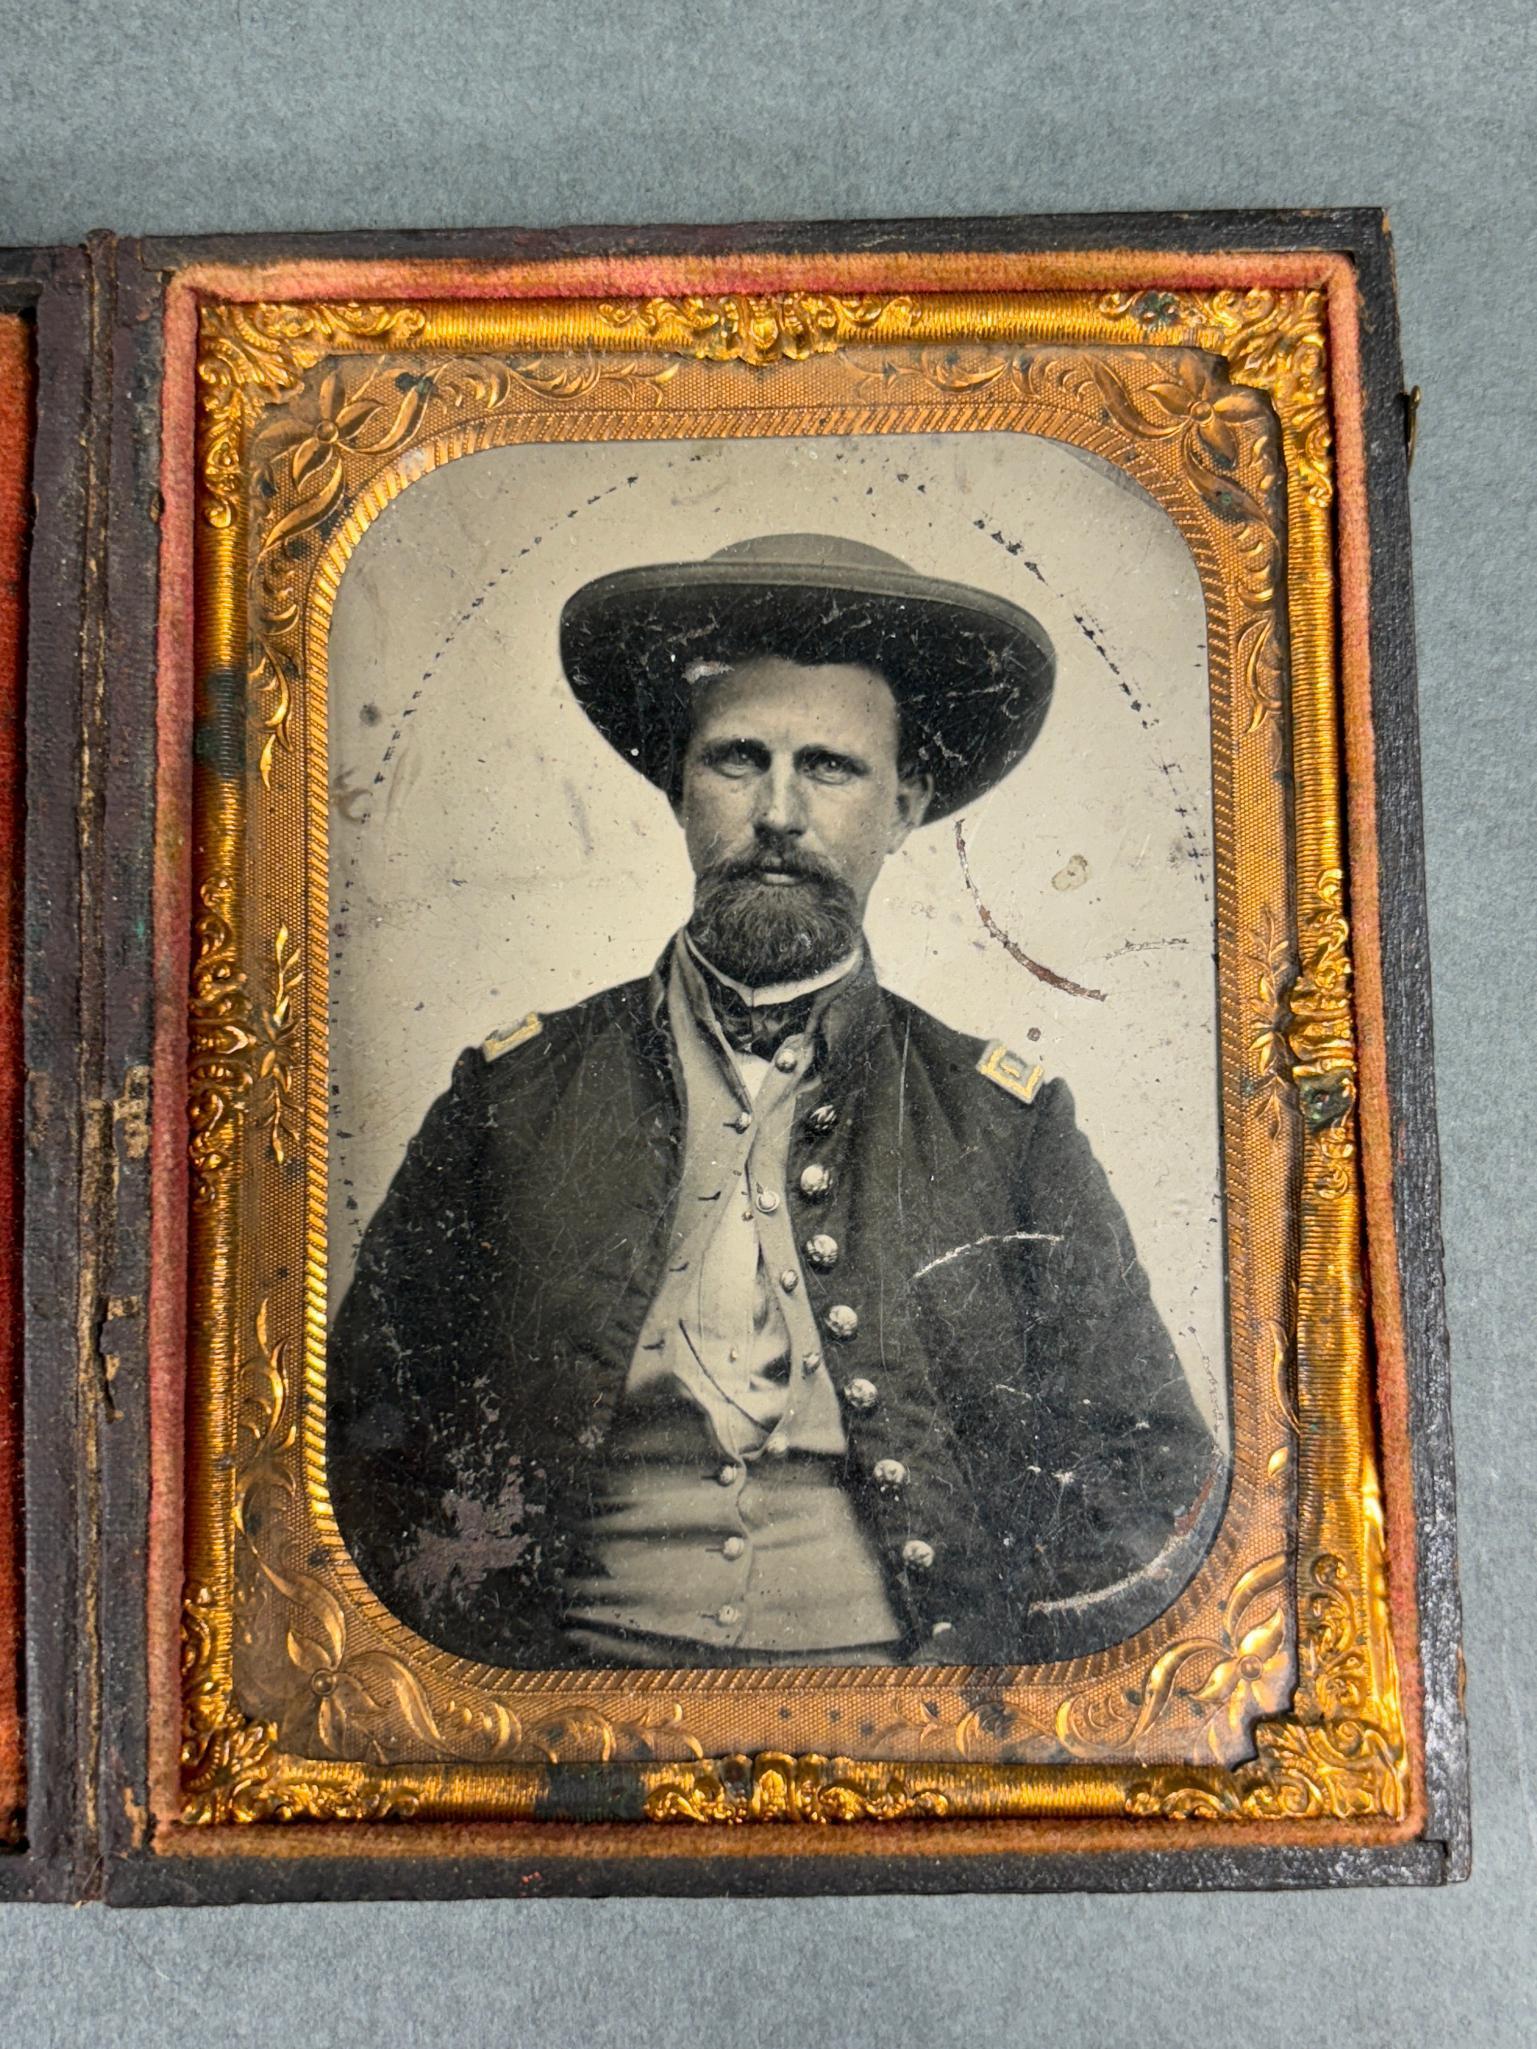 CIVIL WAR TINTYPE UNION OFFICER LARGE SLOUCH HAT